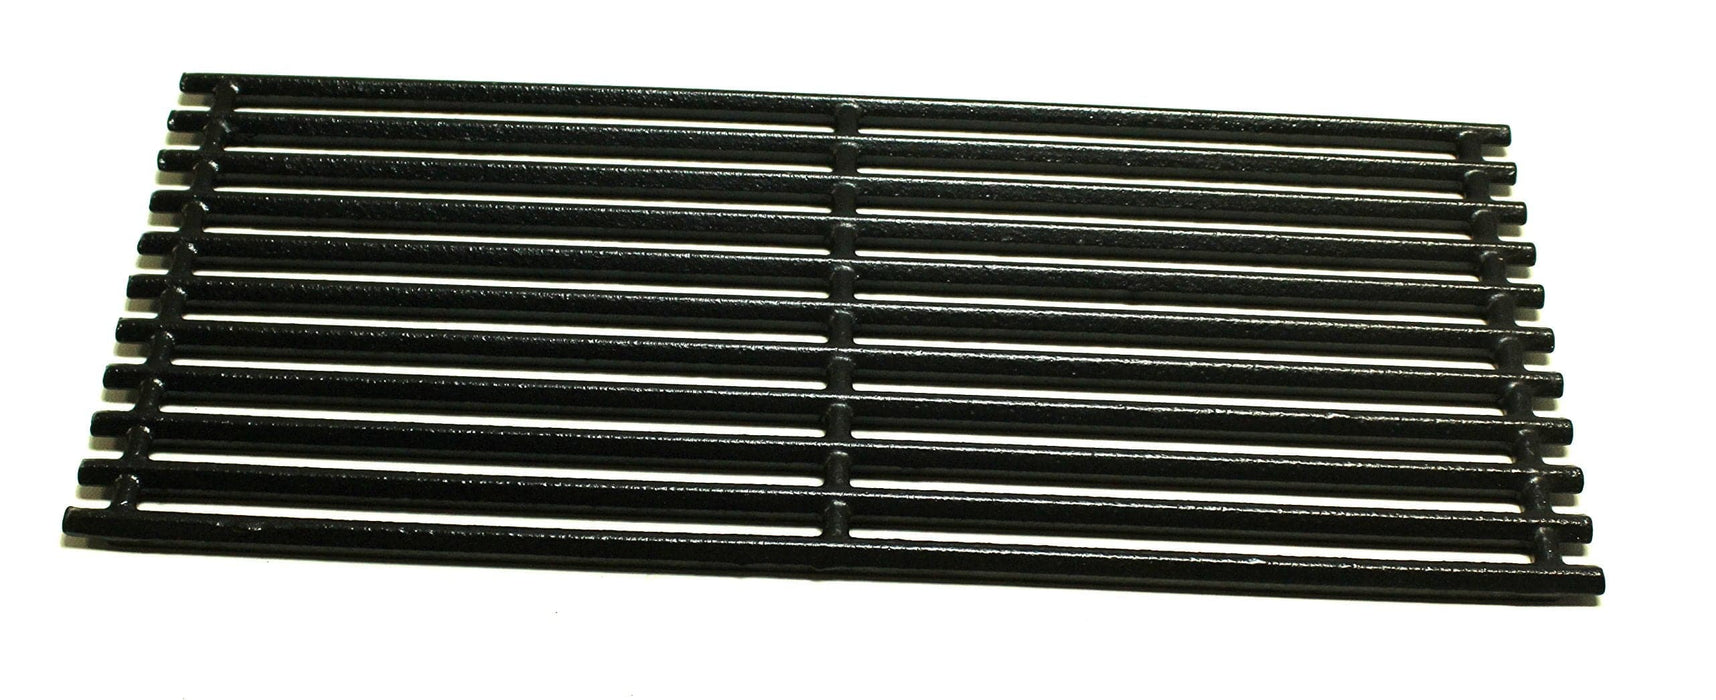 Char-Broil 80021355 Porcelain Packaged Cast Iron Grate (Large) - Grill Parts America